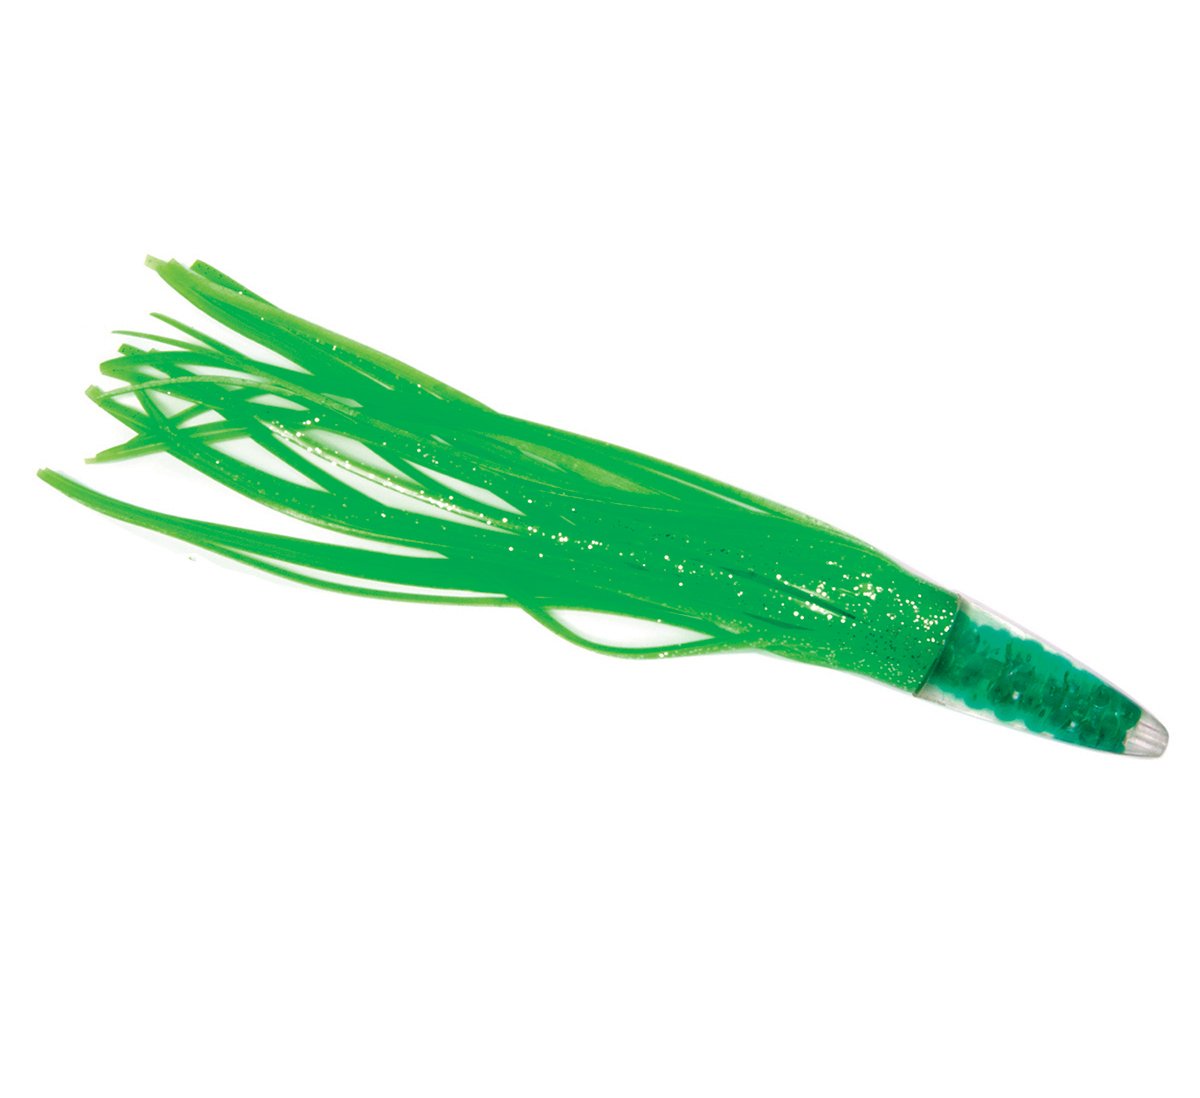 TOP GUN GREEN SALTWATER FISHING LURE WITH SOFT BALLYHOO – Ballyhood Top Gun Saltwater  Fishing Lures